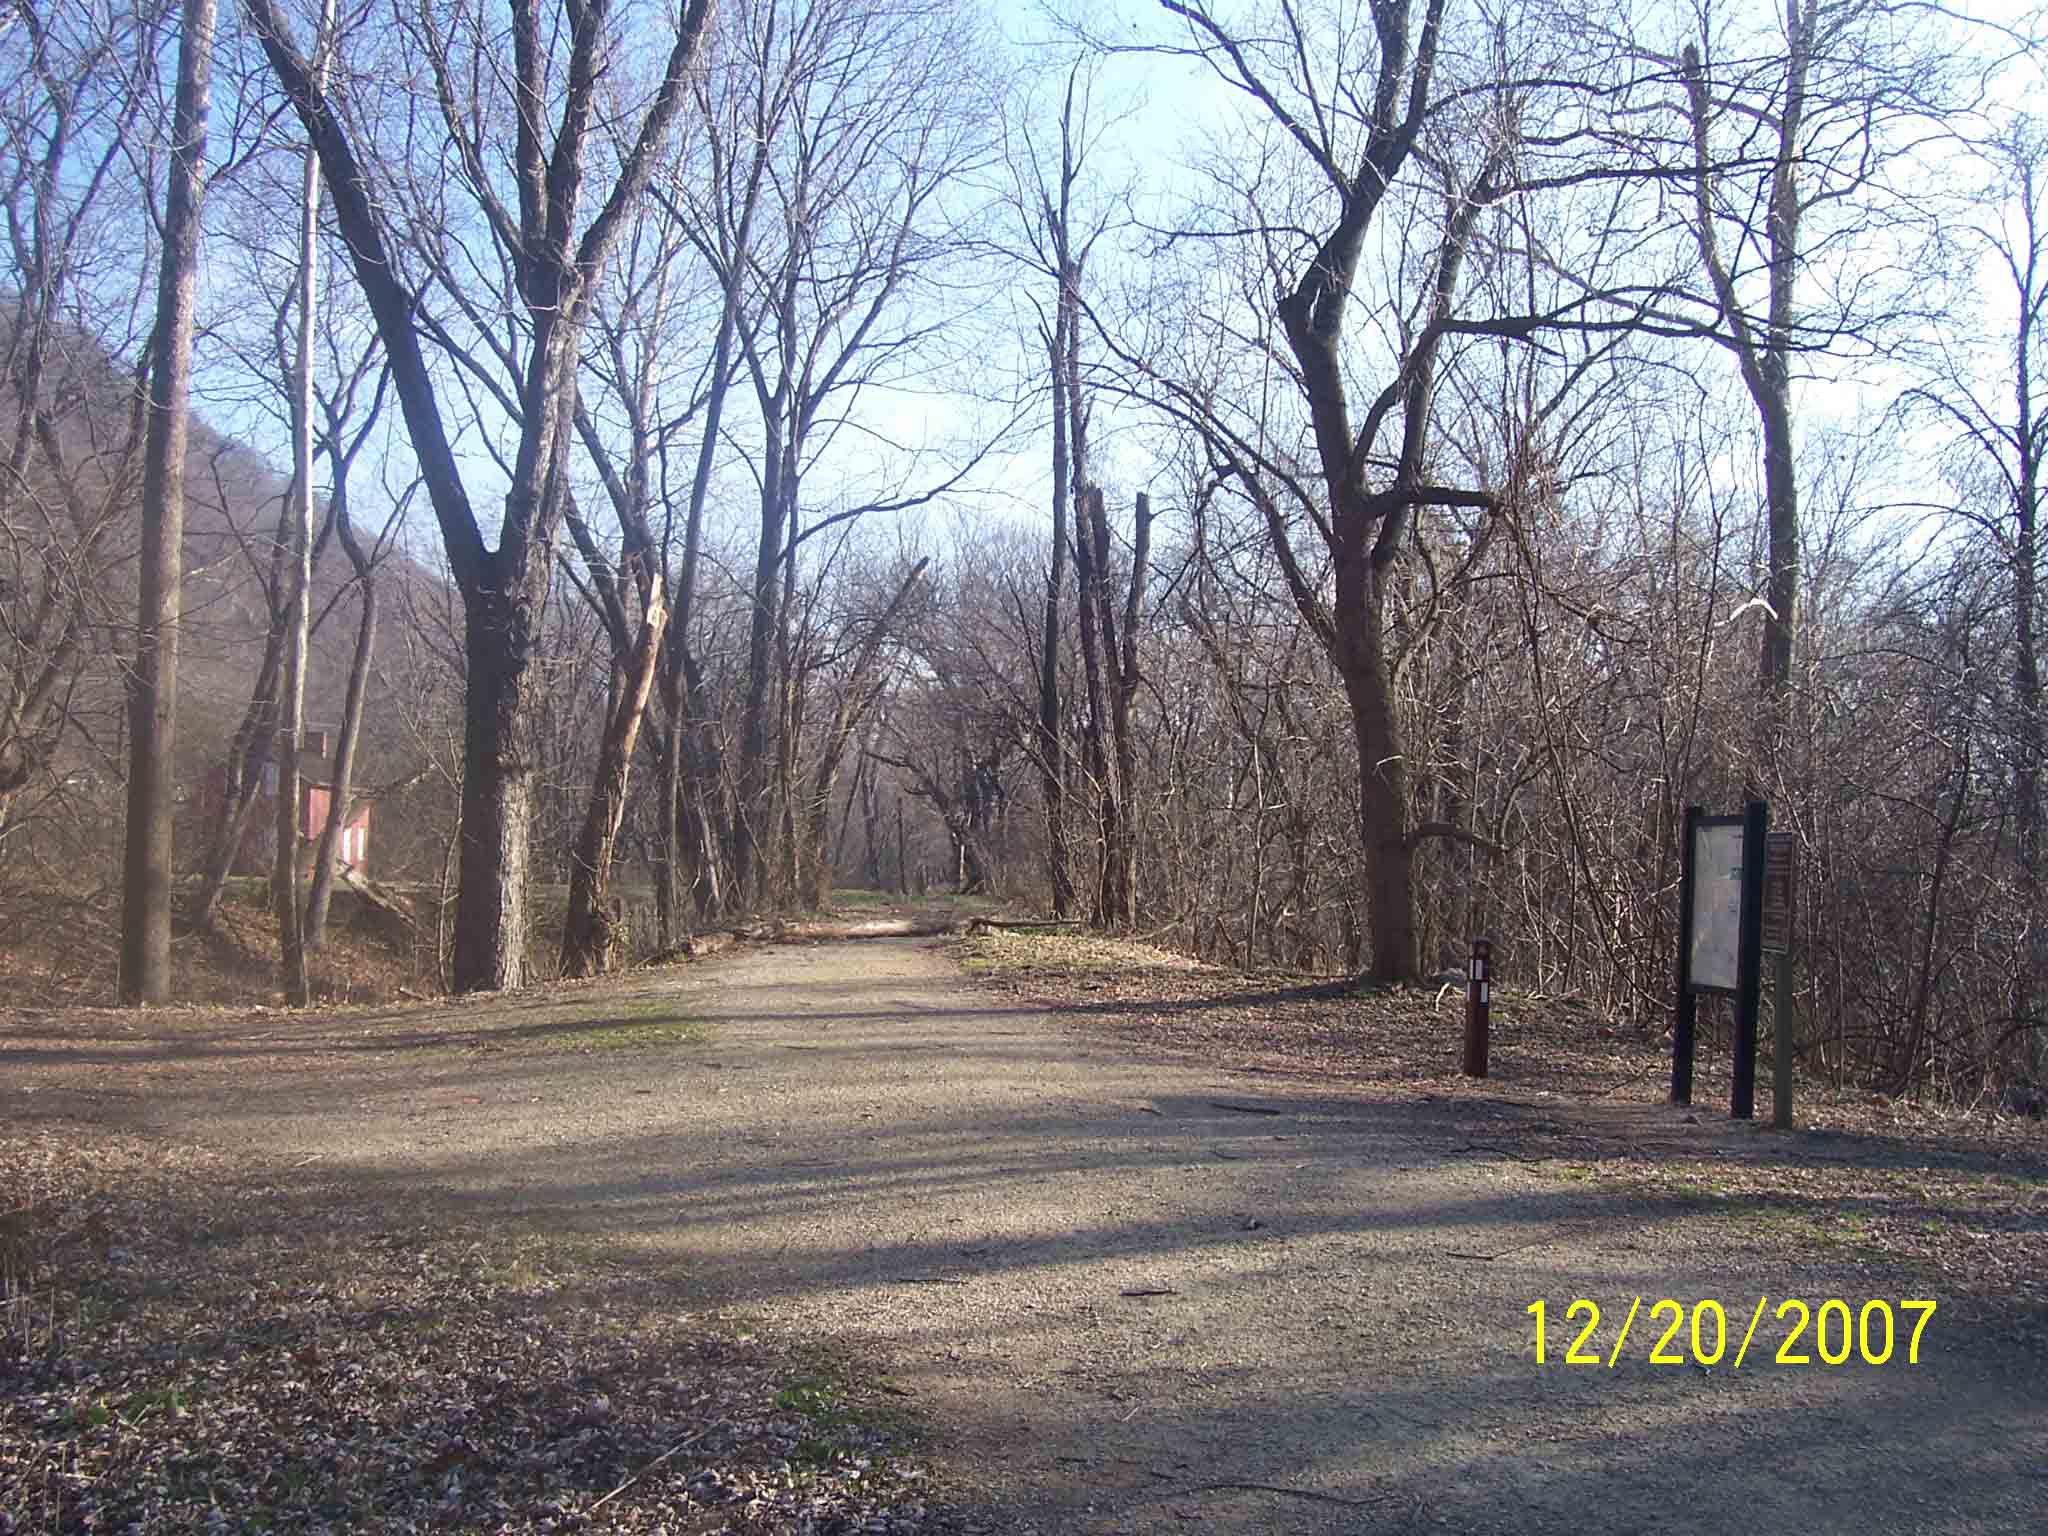 mm 0.5 - View of C&O canal path converging with AT.  Courtesy at_md_rob@yahoo.com